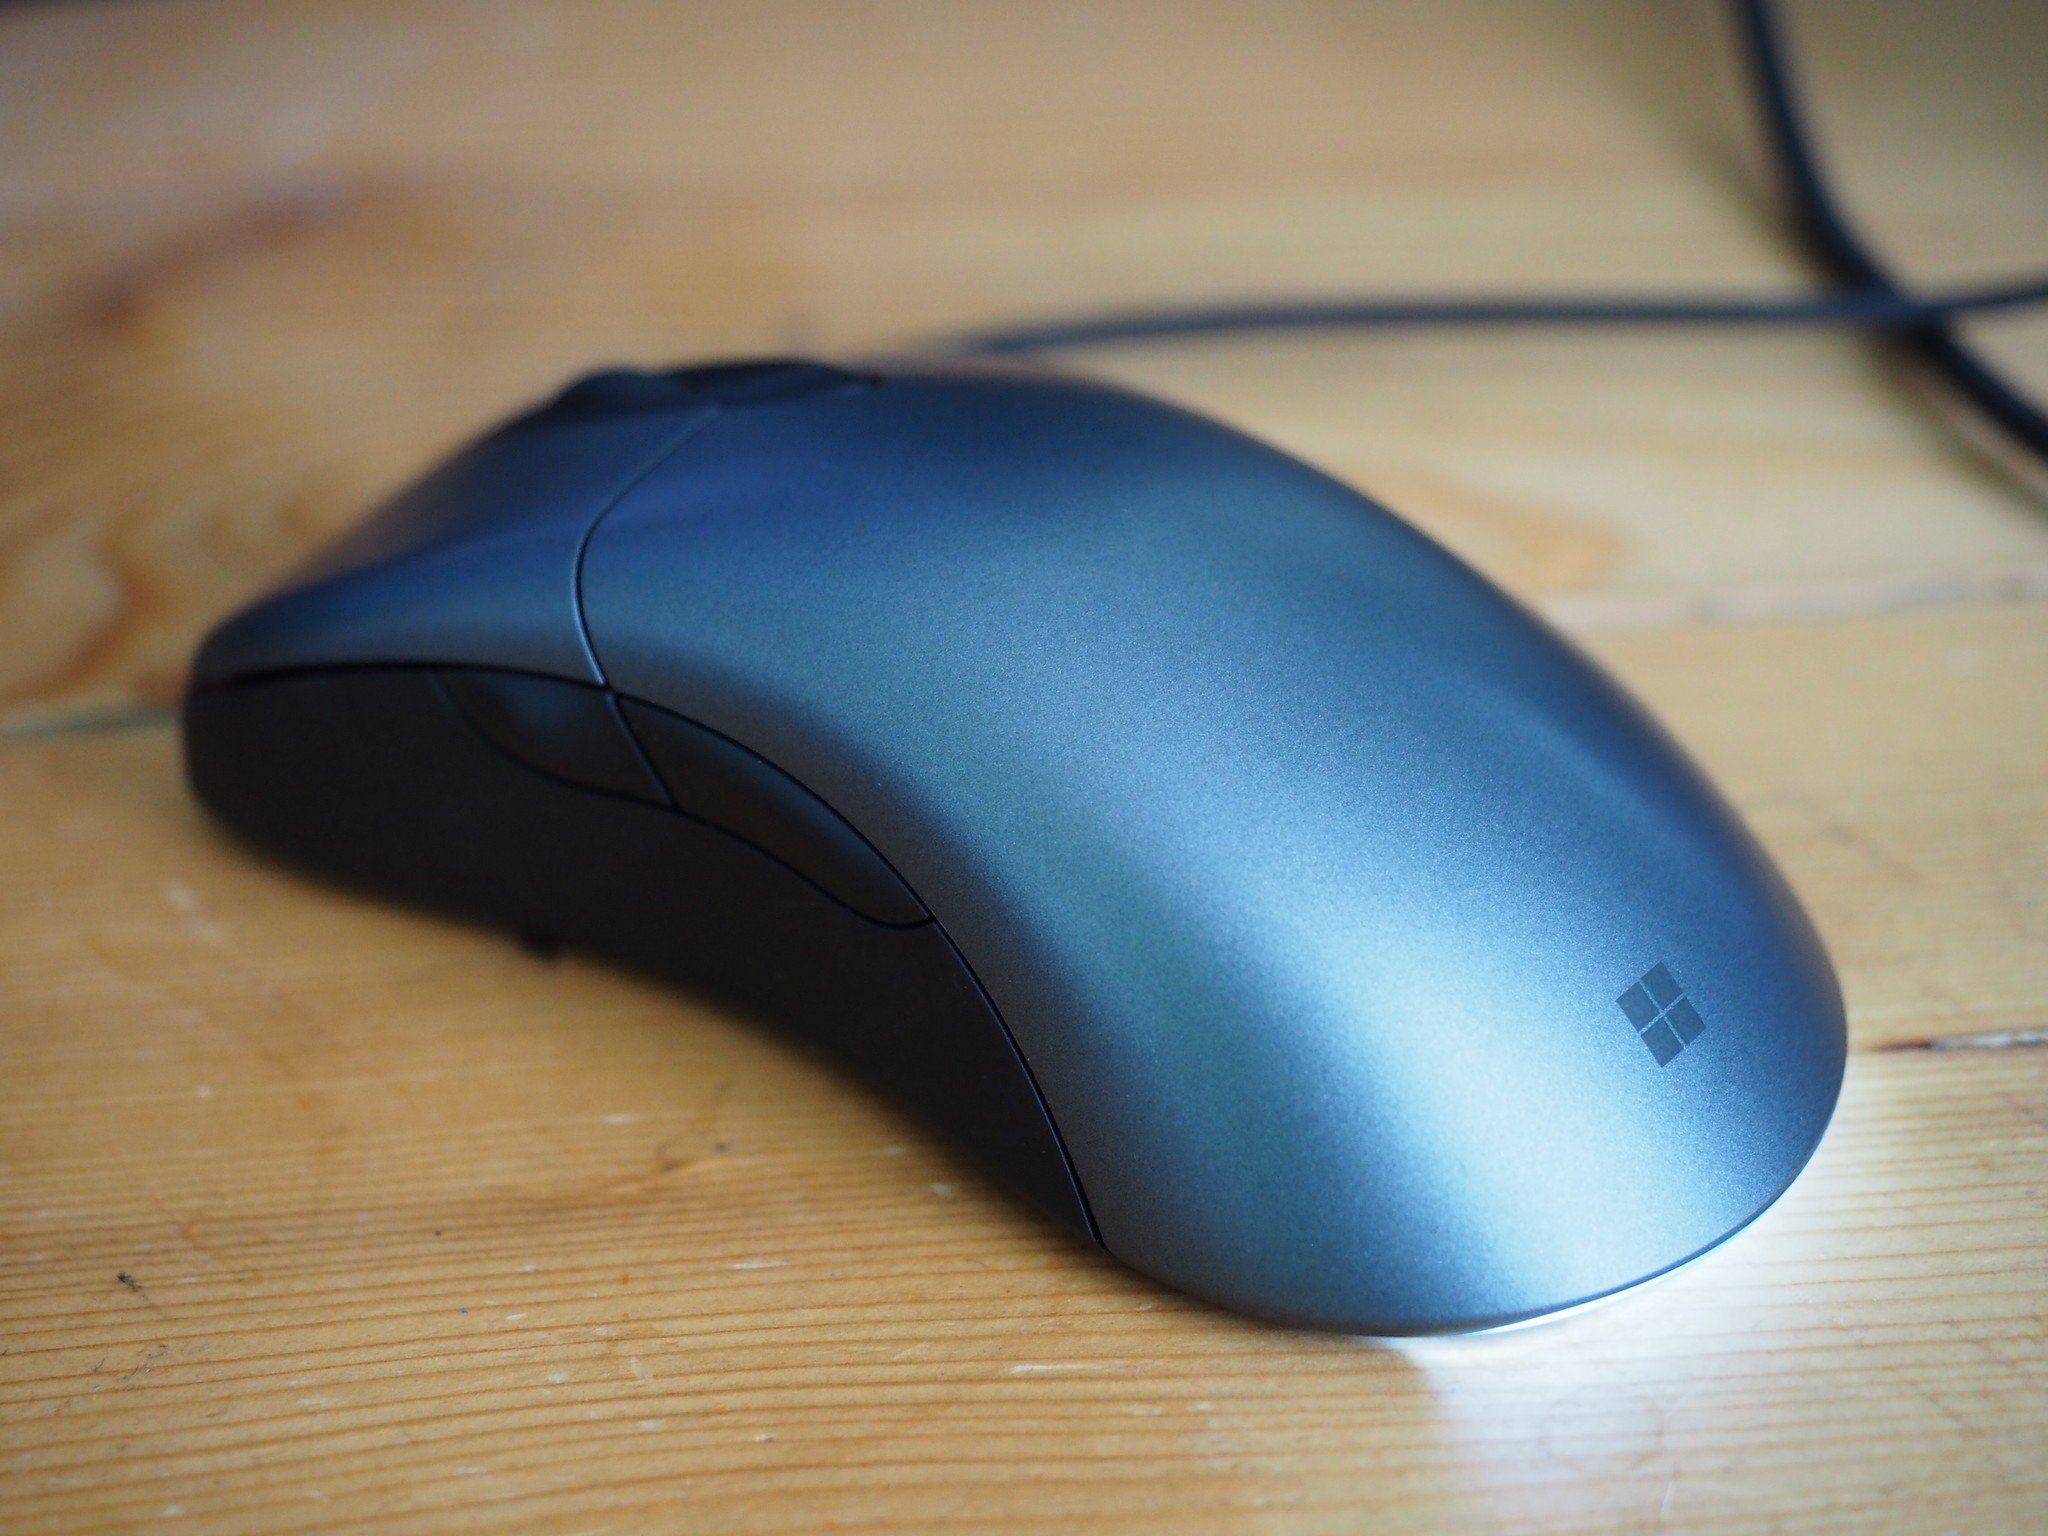 Snag Microsoft's Classic IntelliMouse for just $22